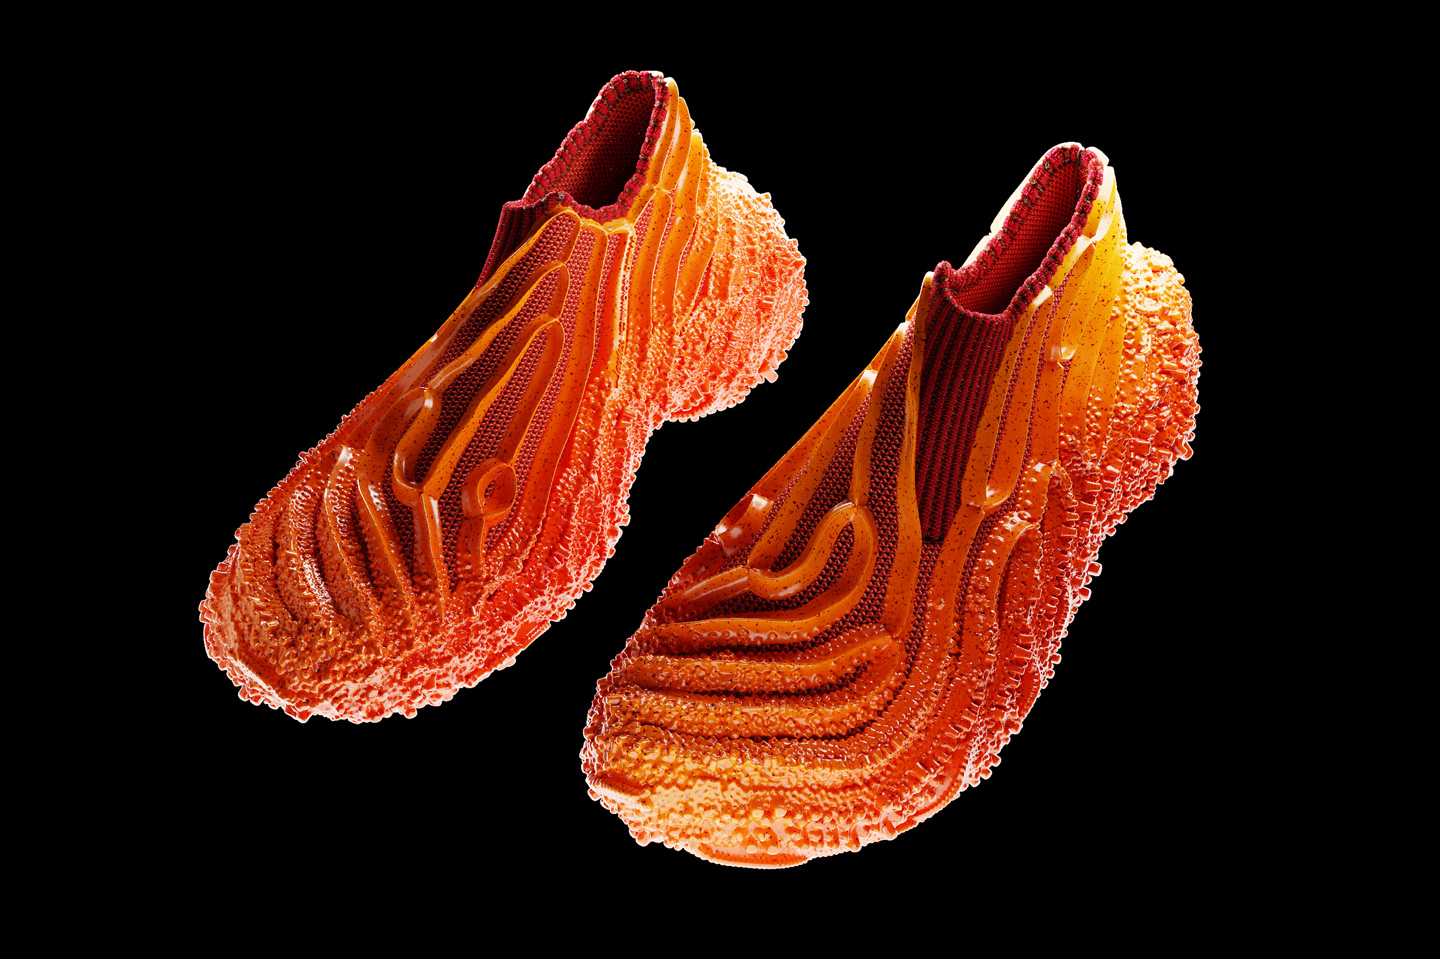 #Otherworldly Laceless Shoe concept looks like it was designed to be worn on Mars